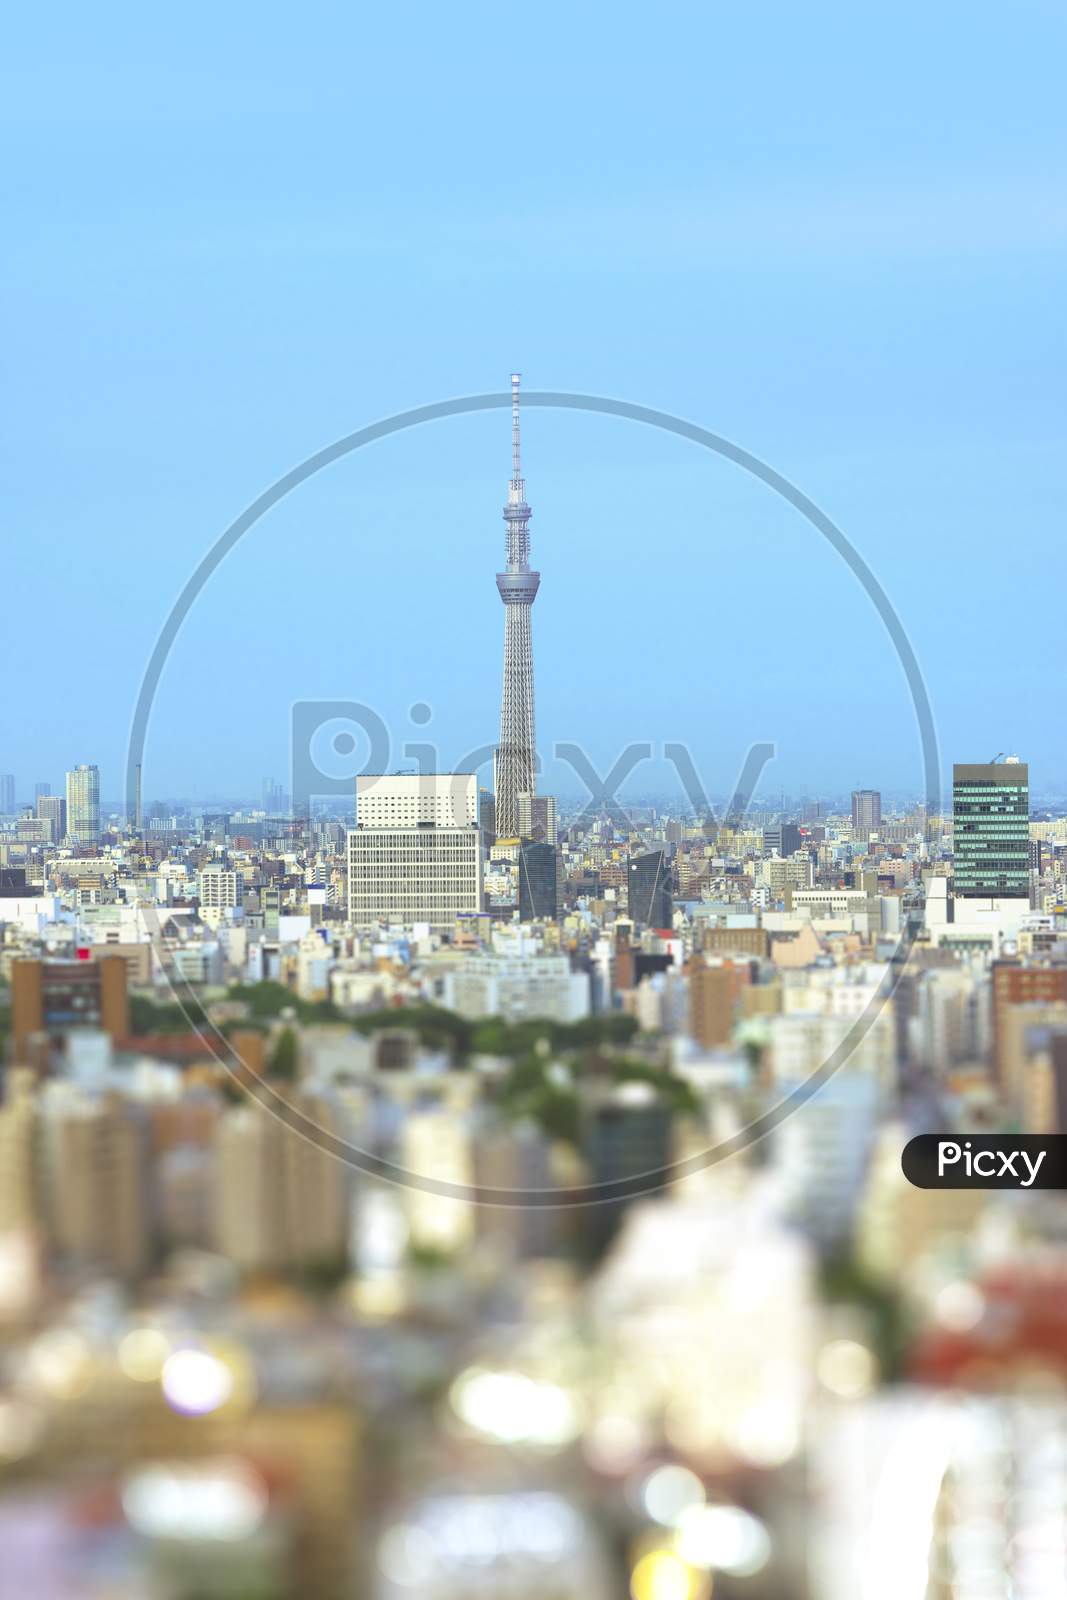 Aerial View In Tilt-Shift Of The City Of Tokyo With The Skytree Tower In The Center And Bokeh Around.